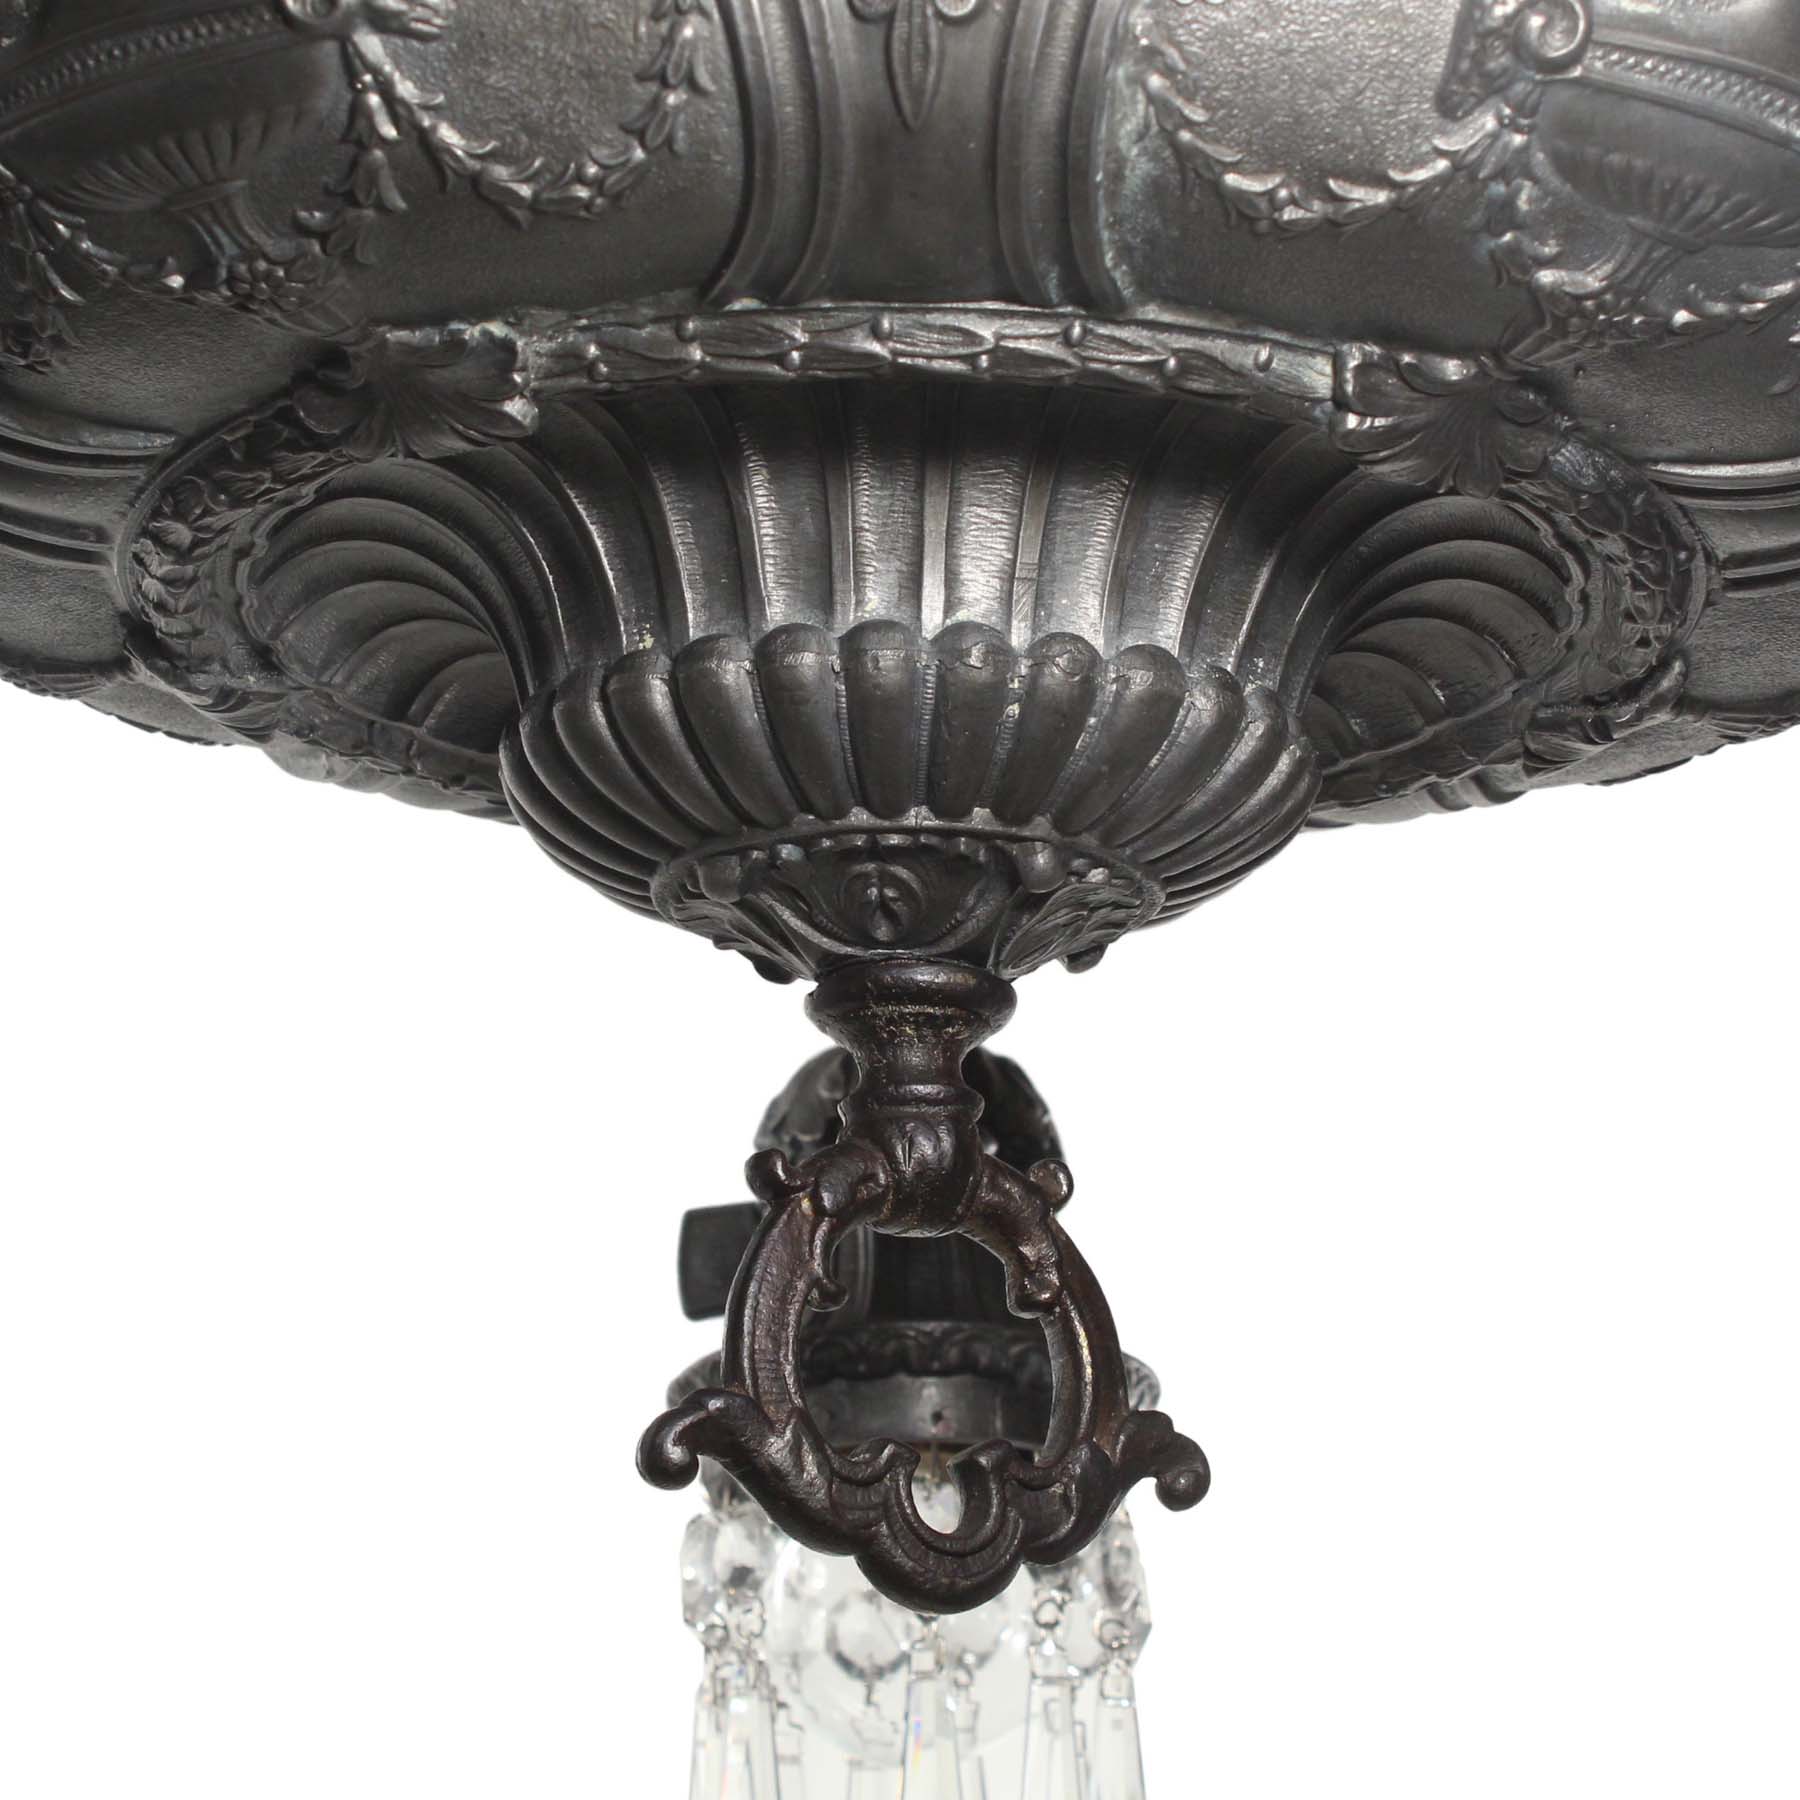 SOLD Antique Figural Neoclassical Chandelier with Prisms, Adam Style-67504